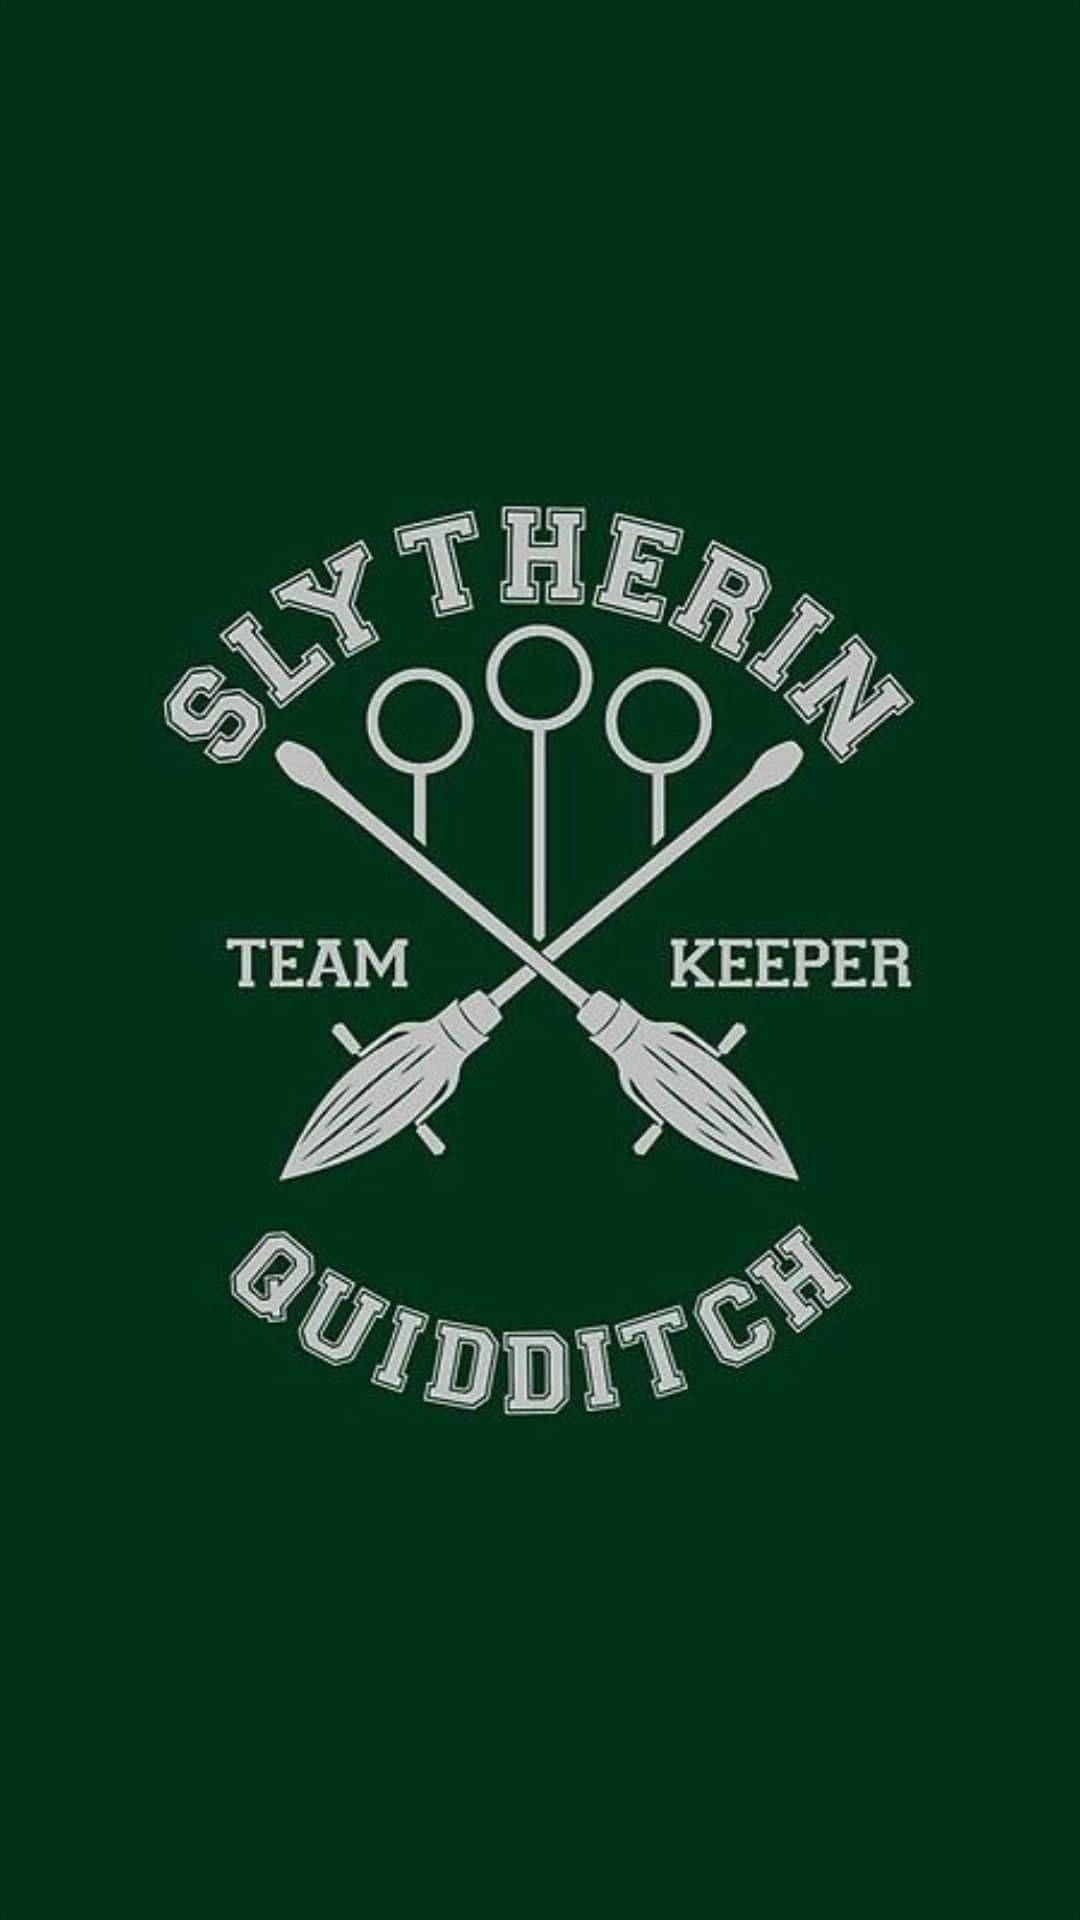 Download Slytherin Aesthetic Quidditch Team Keeper Wallpaper